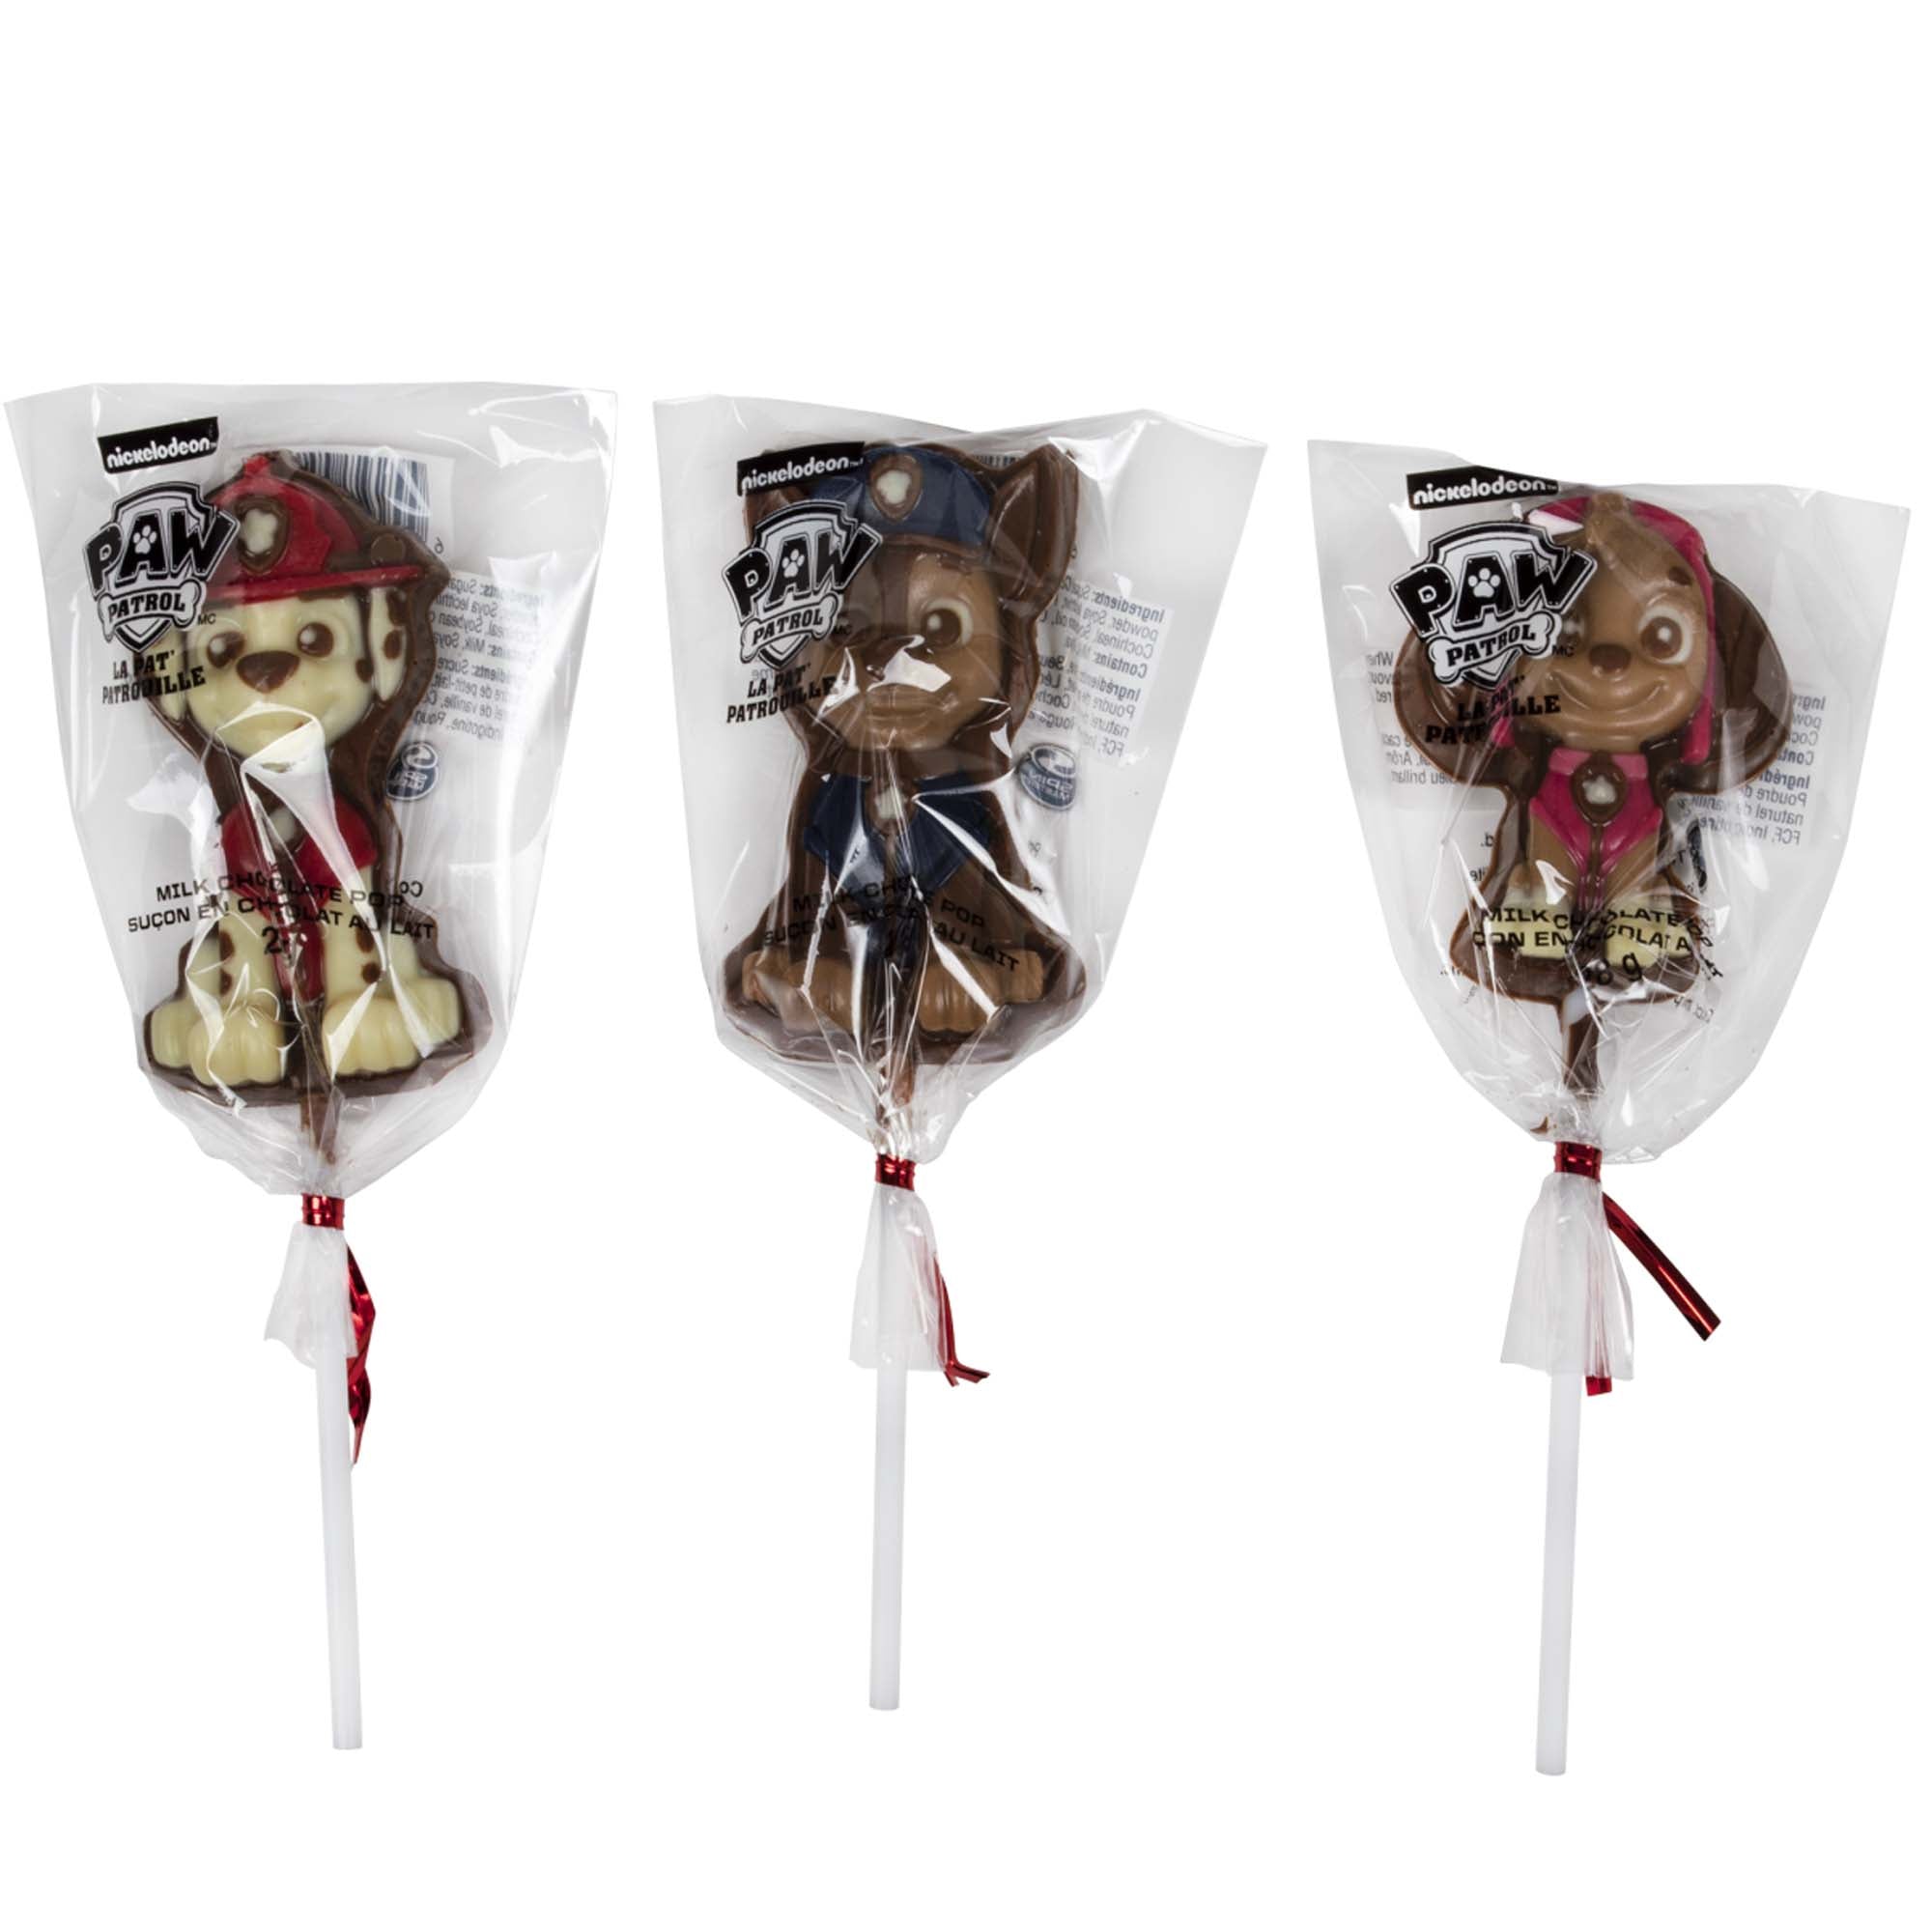 Paw Patrol Chocolate Pops, 28g, Assortment, 1 Count